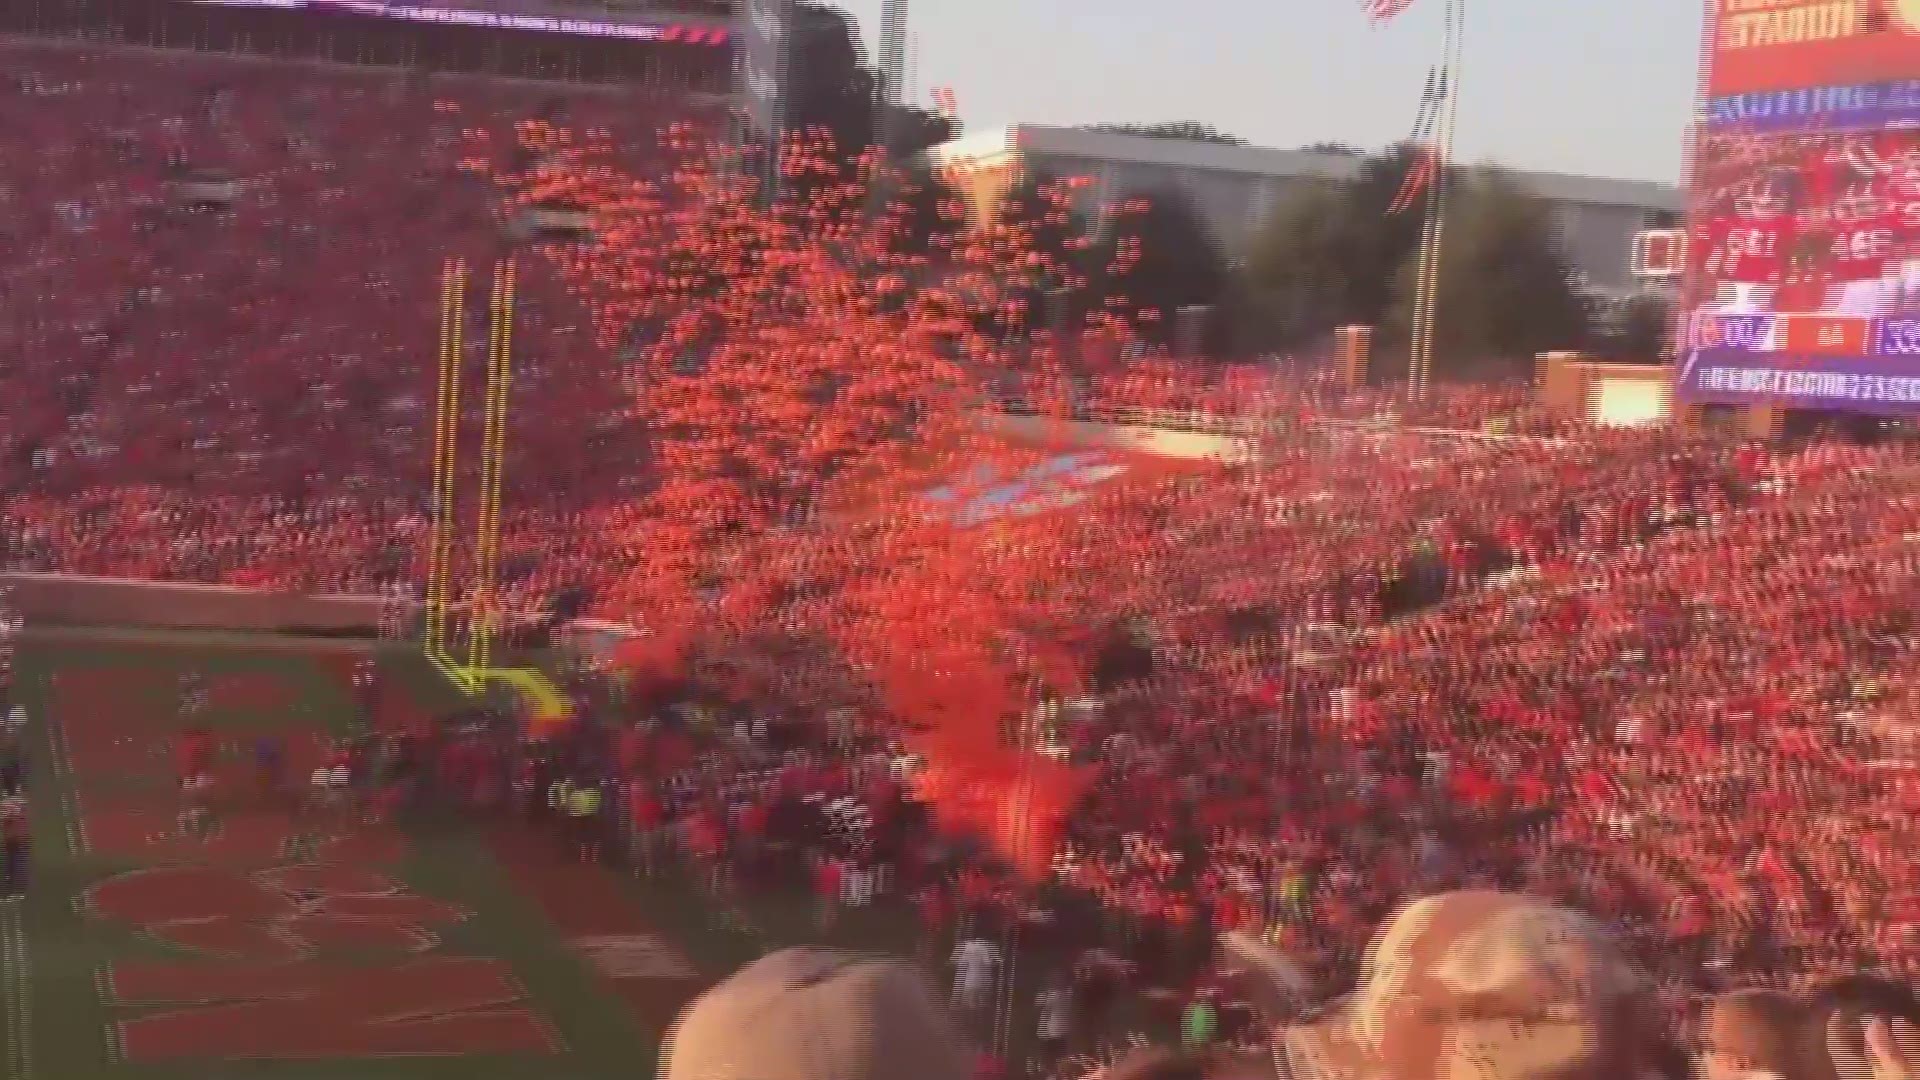 Clemson has ditched a decades-long tradition of releasing balloons at football game, all to help the environment.